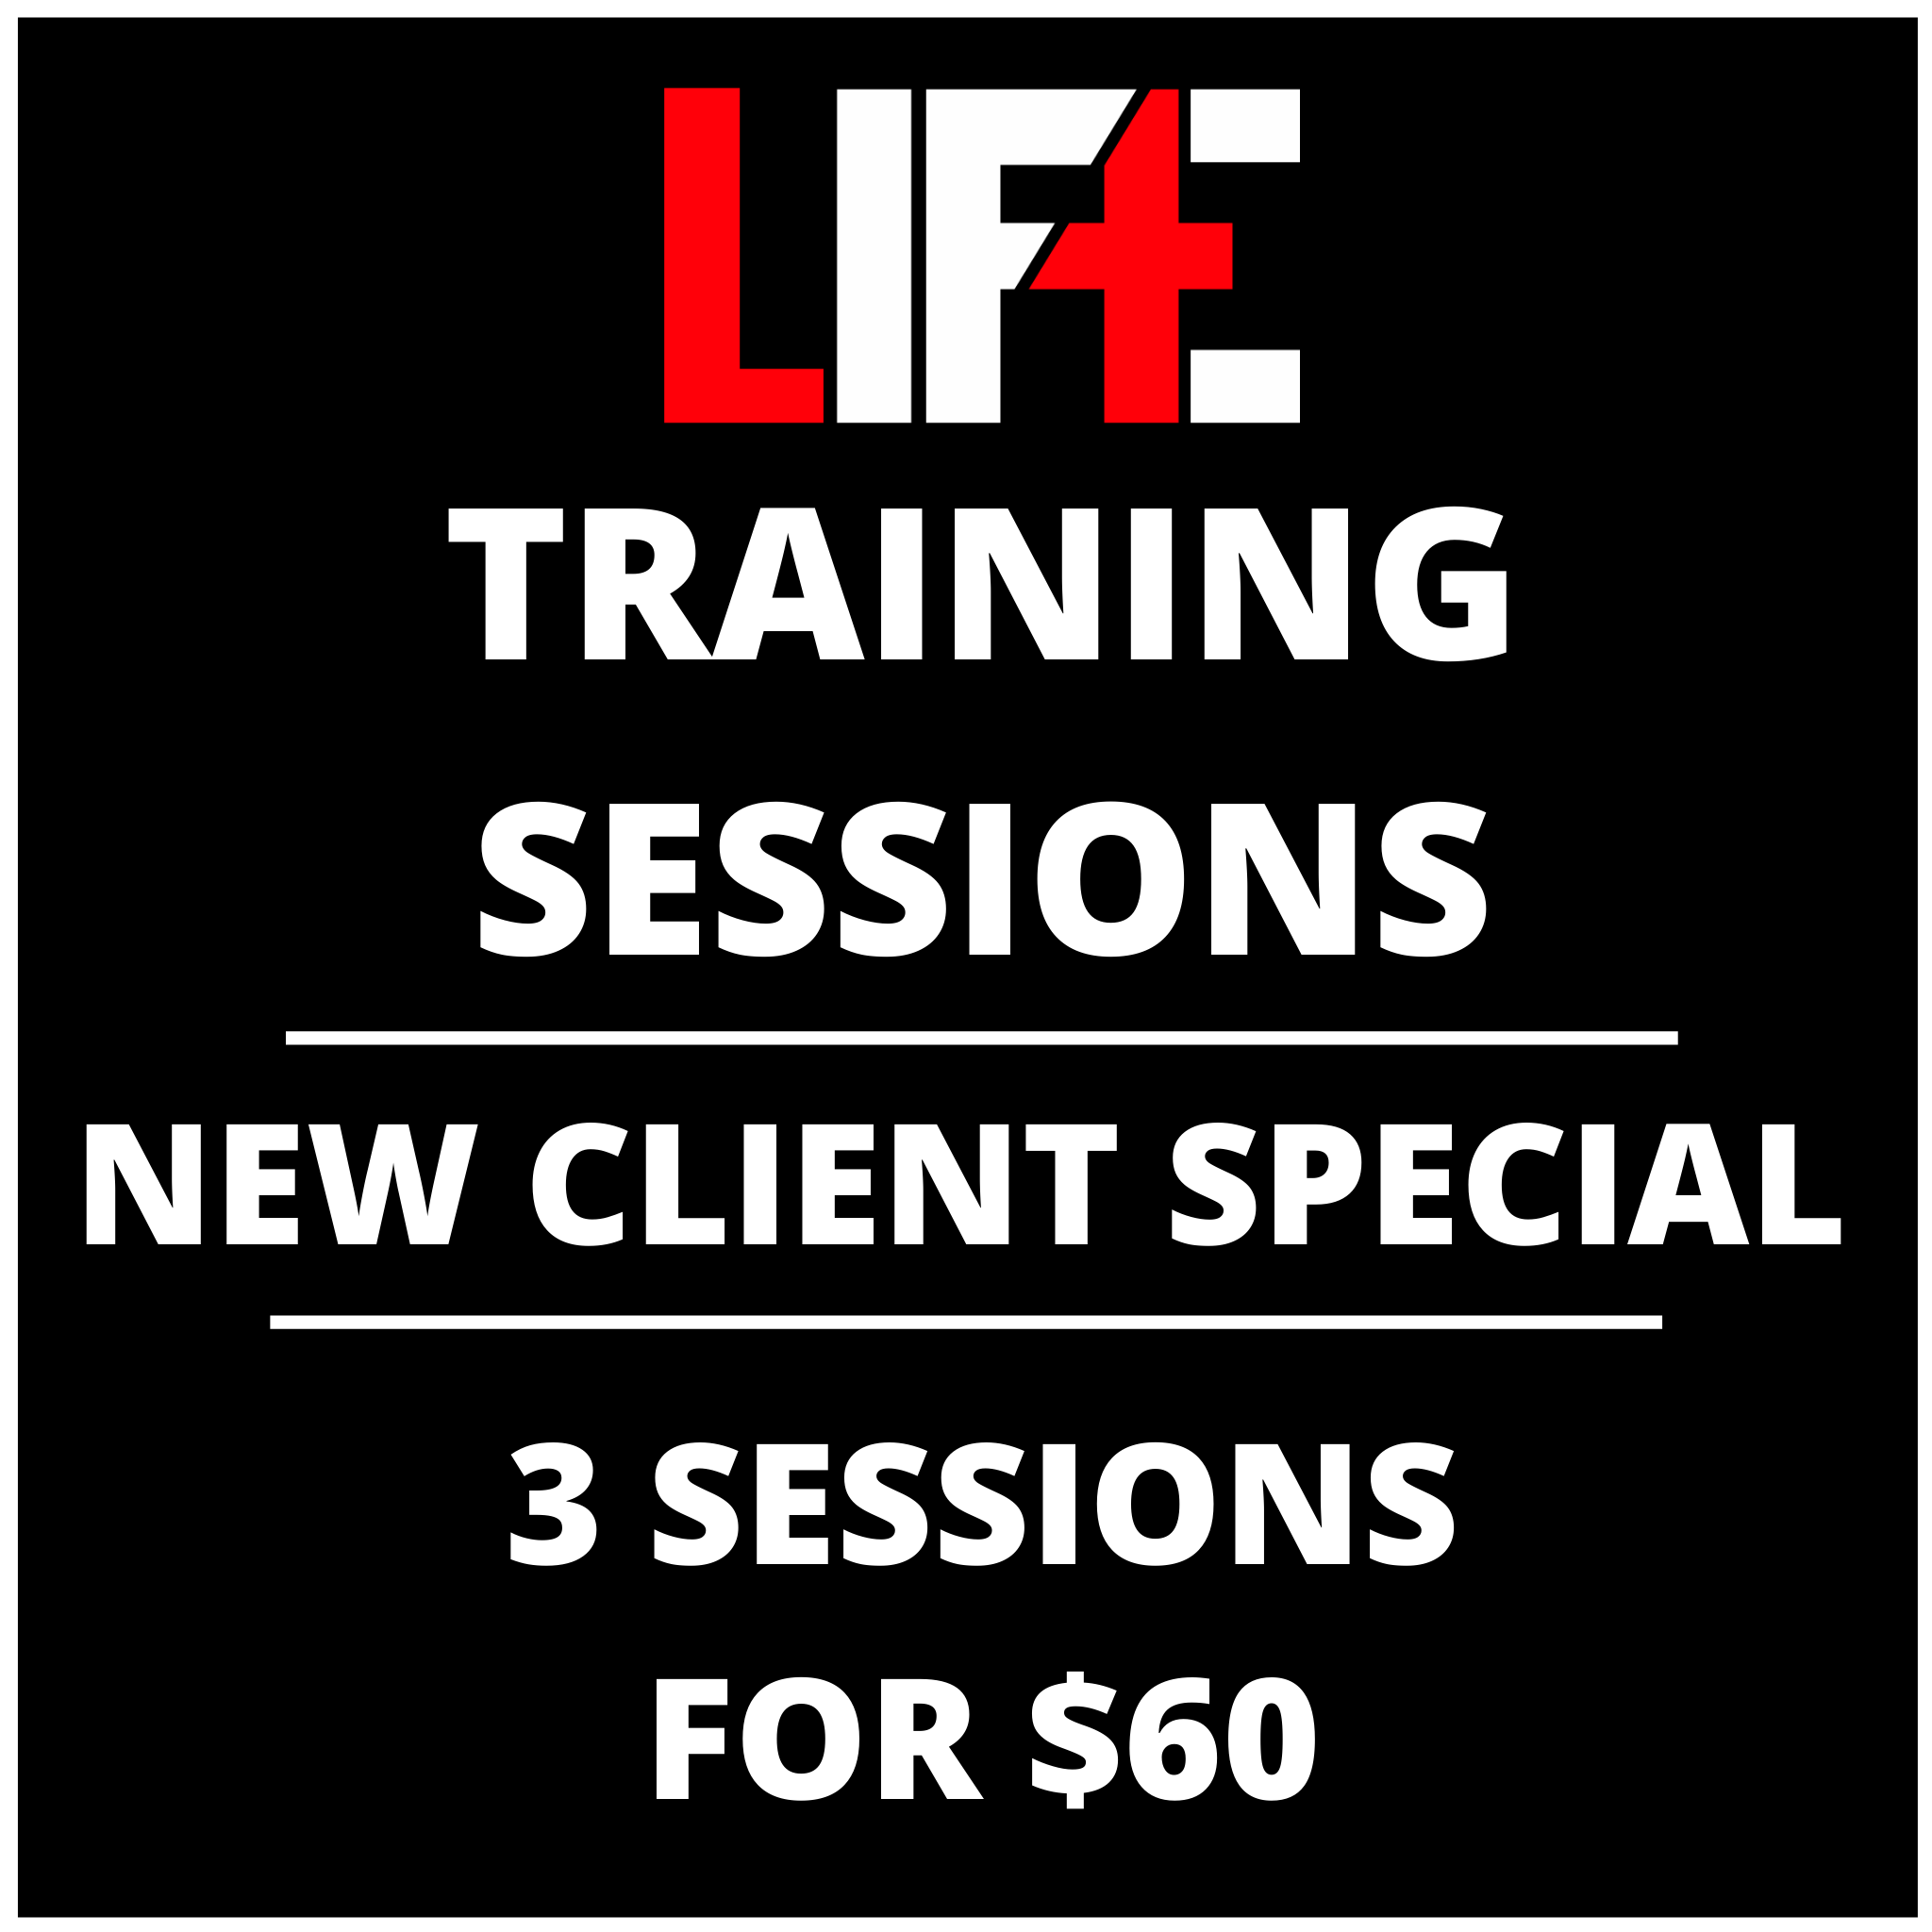 LIFTE Lab Training Sessions (New Client Special)